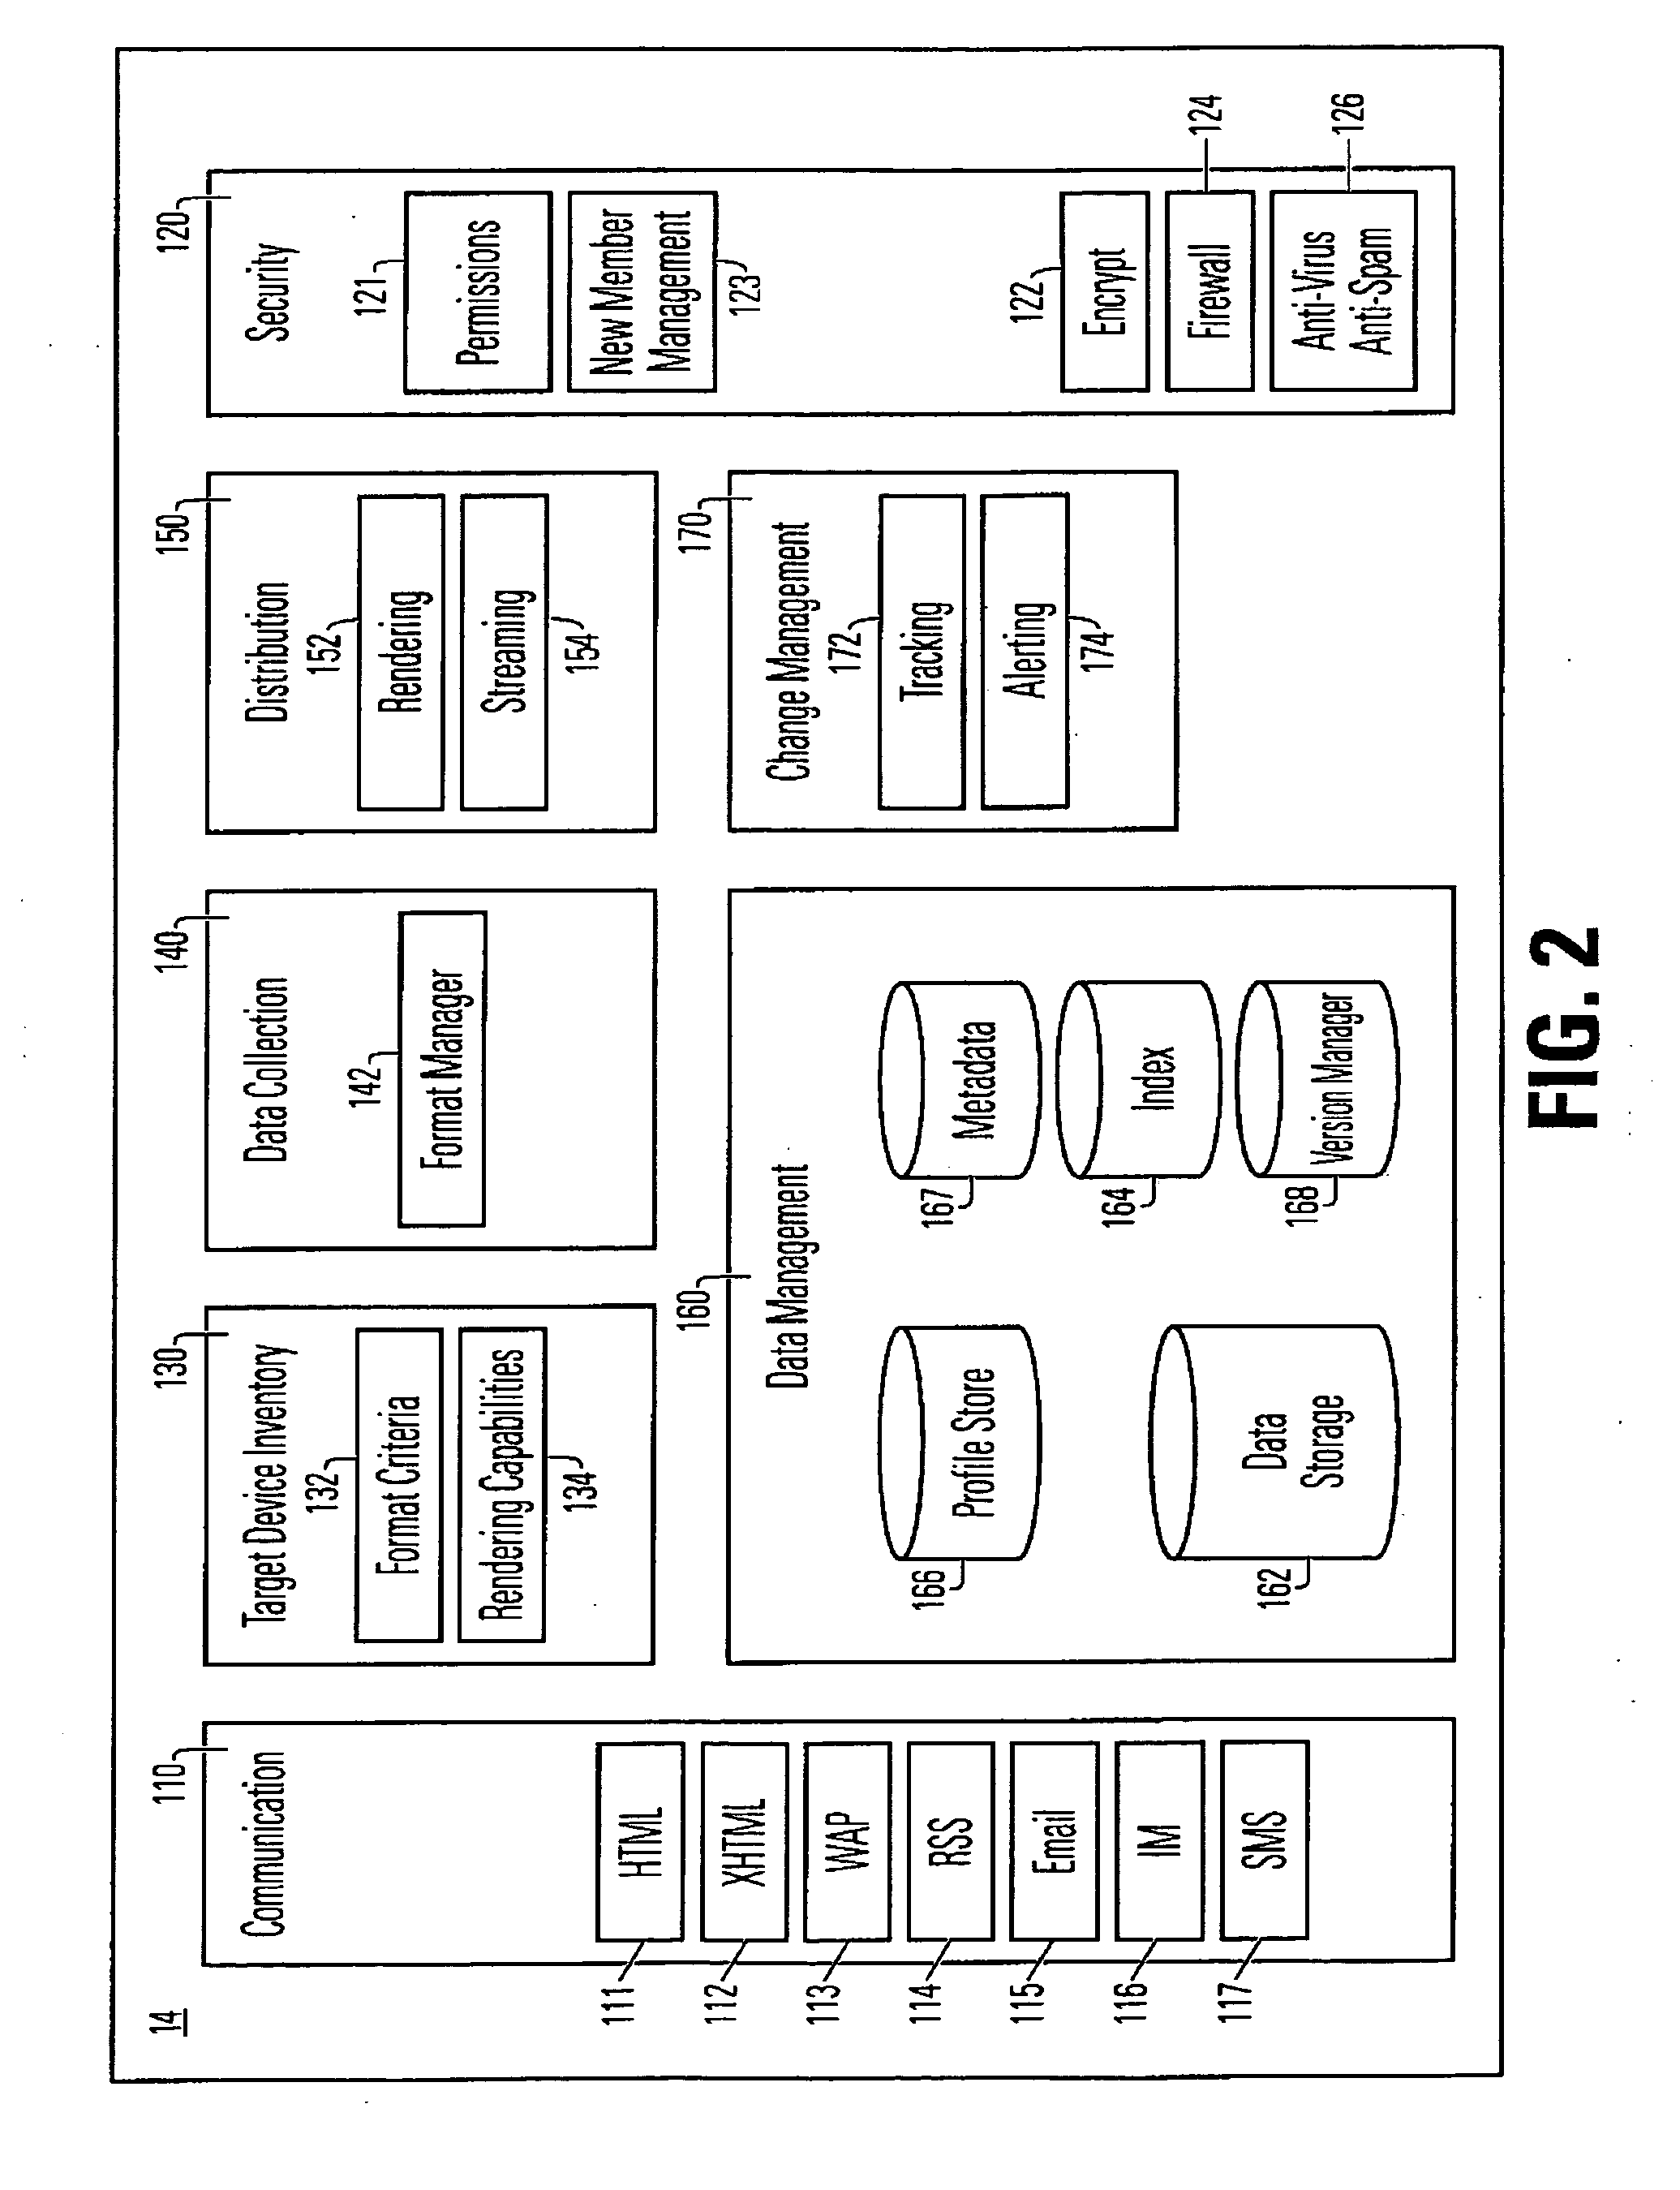 Method for distributing data, adapted for mobile devices